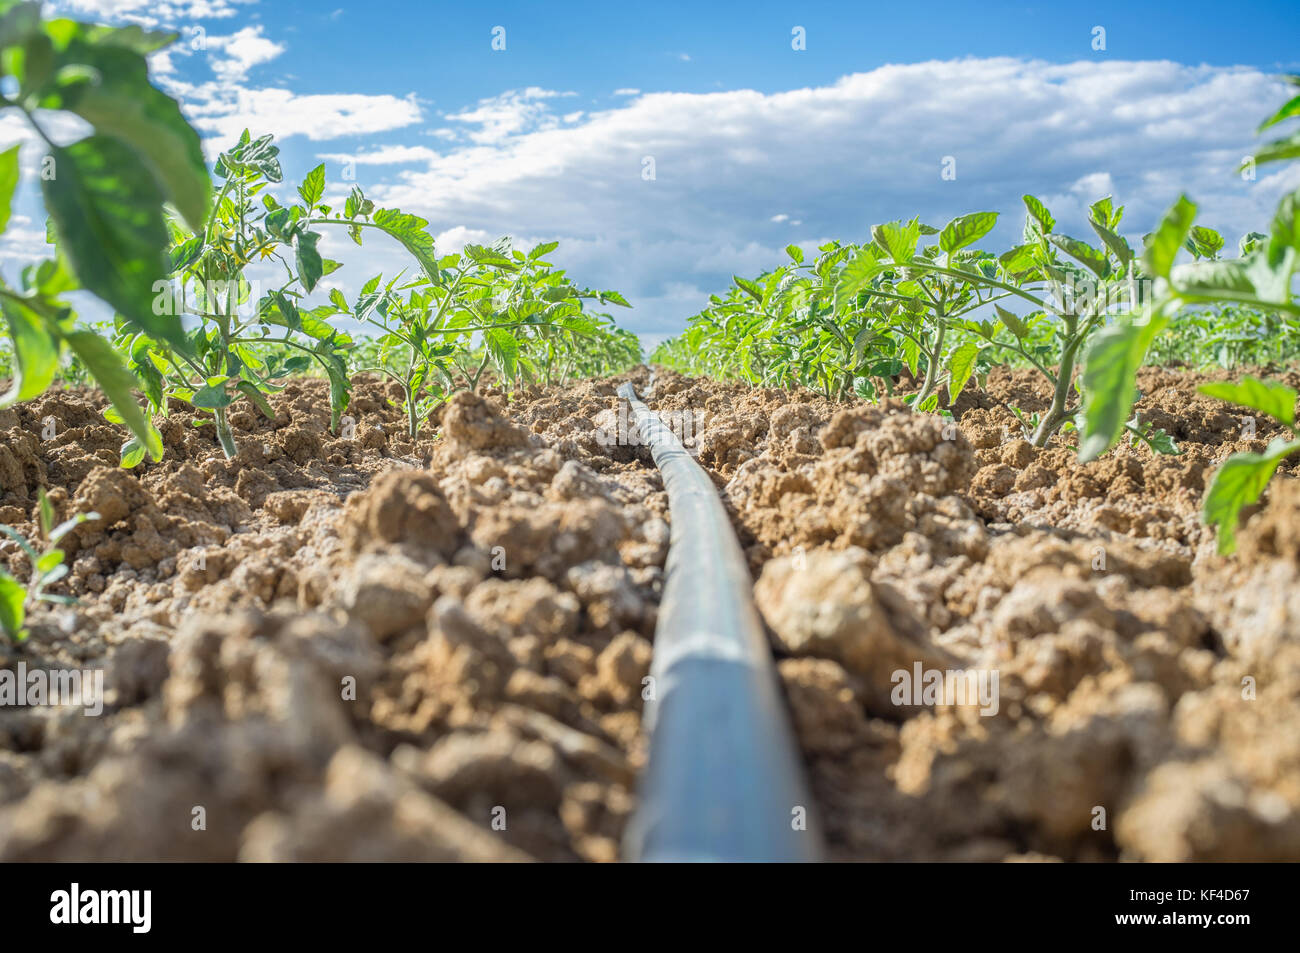 Young tomato plant growing with drip irrigation system. Ground level view Stock Photo